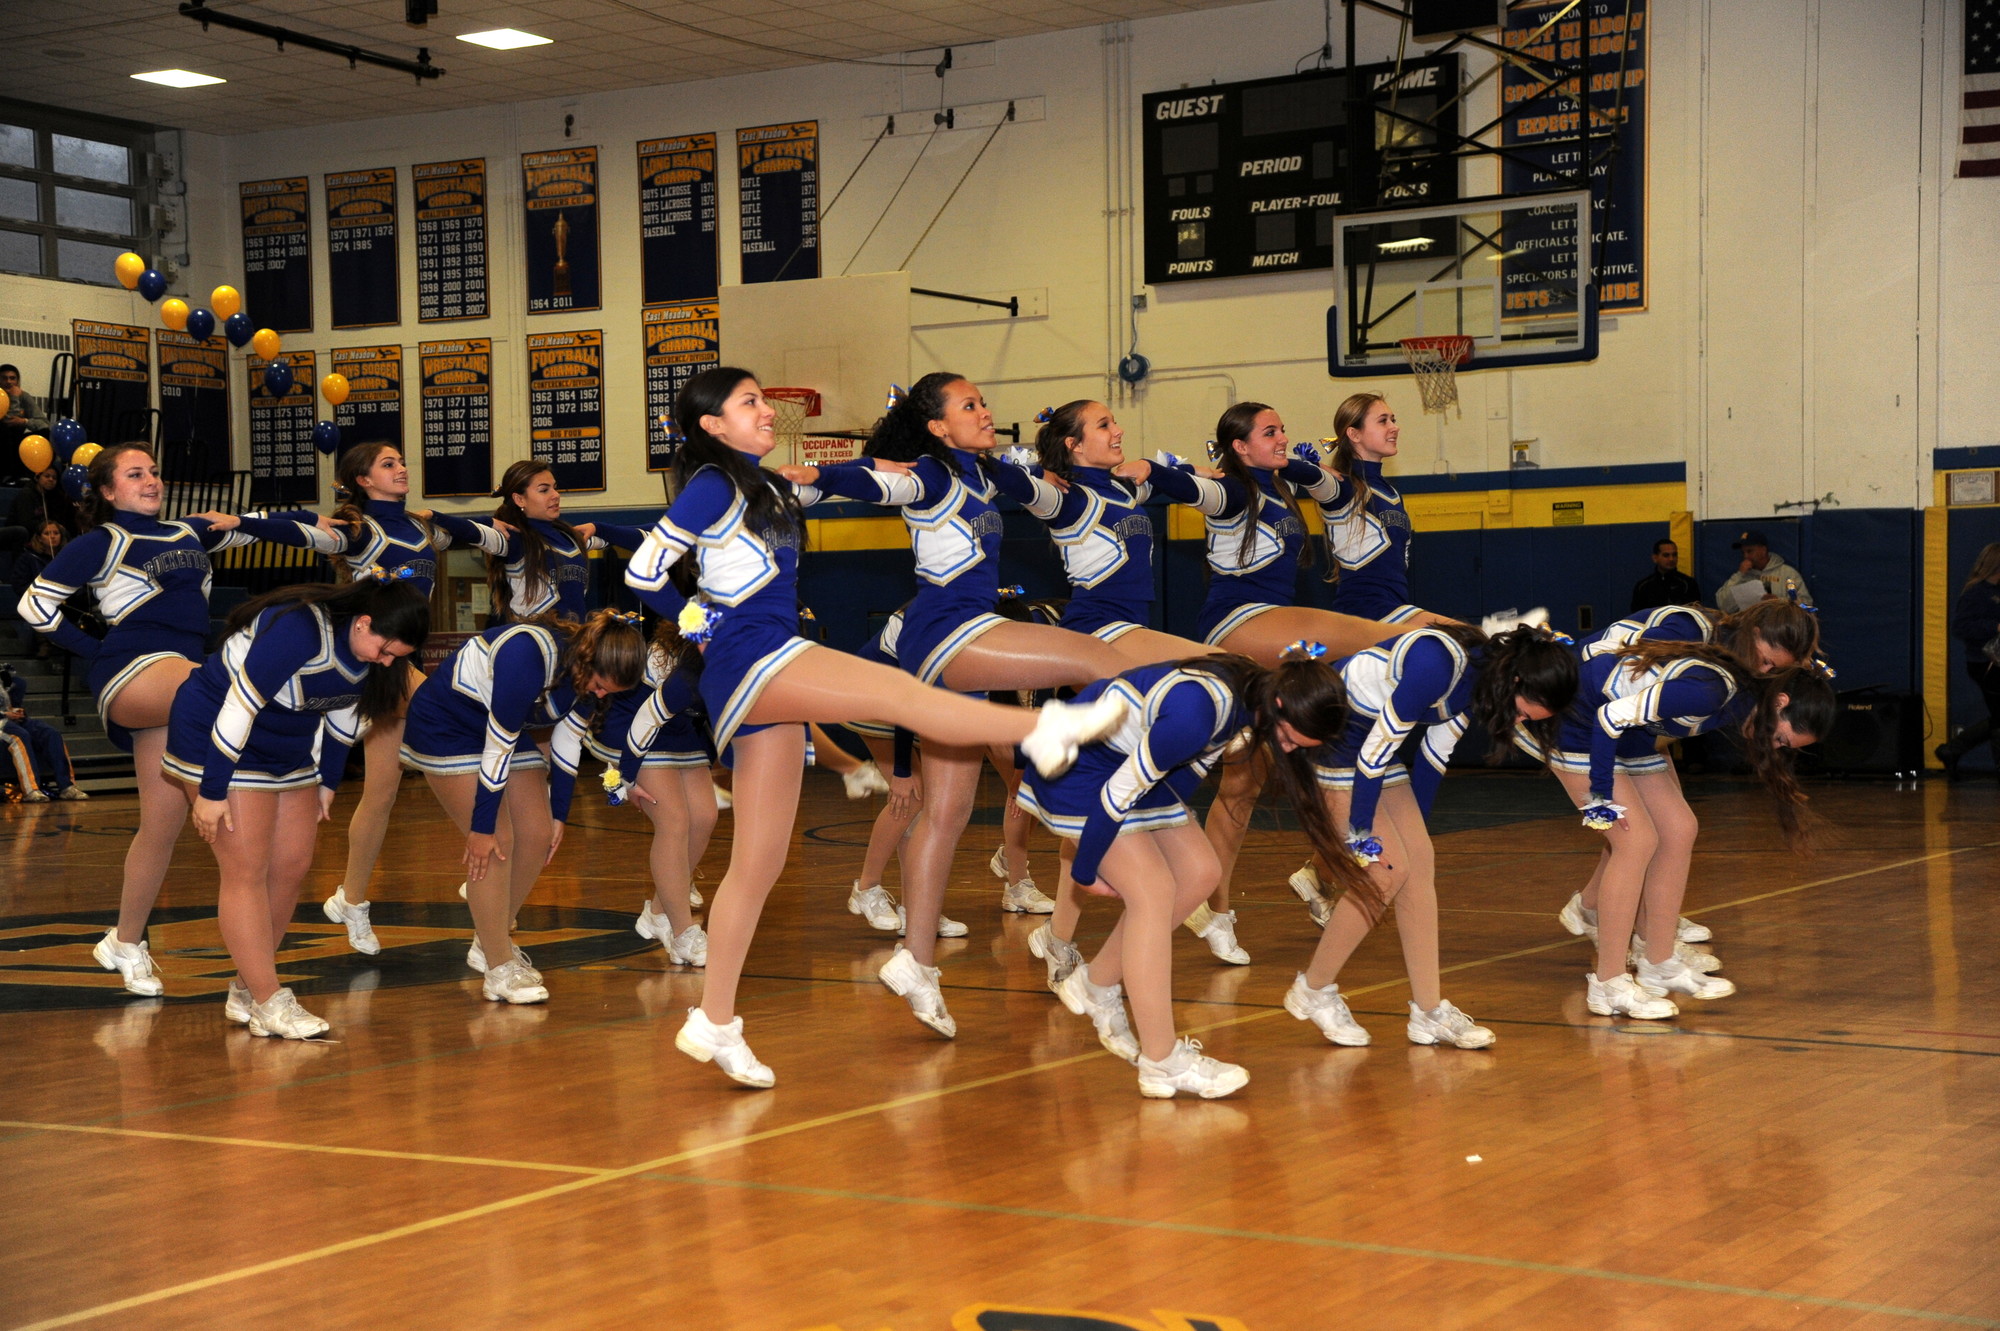 The kickline squad at East Meadow High School put on a show at last year’s Homecoming parade.